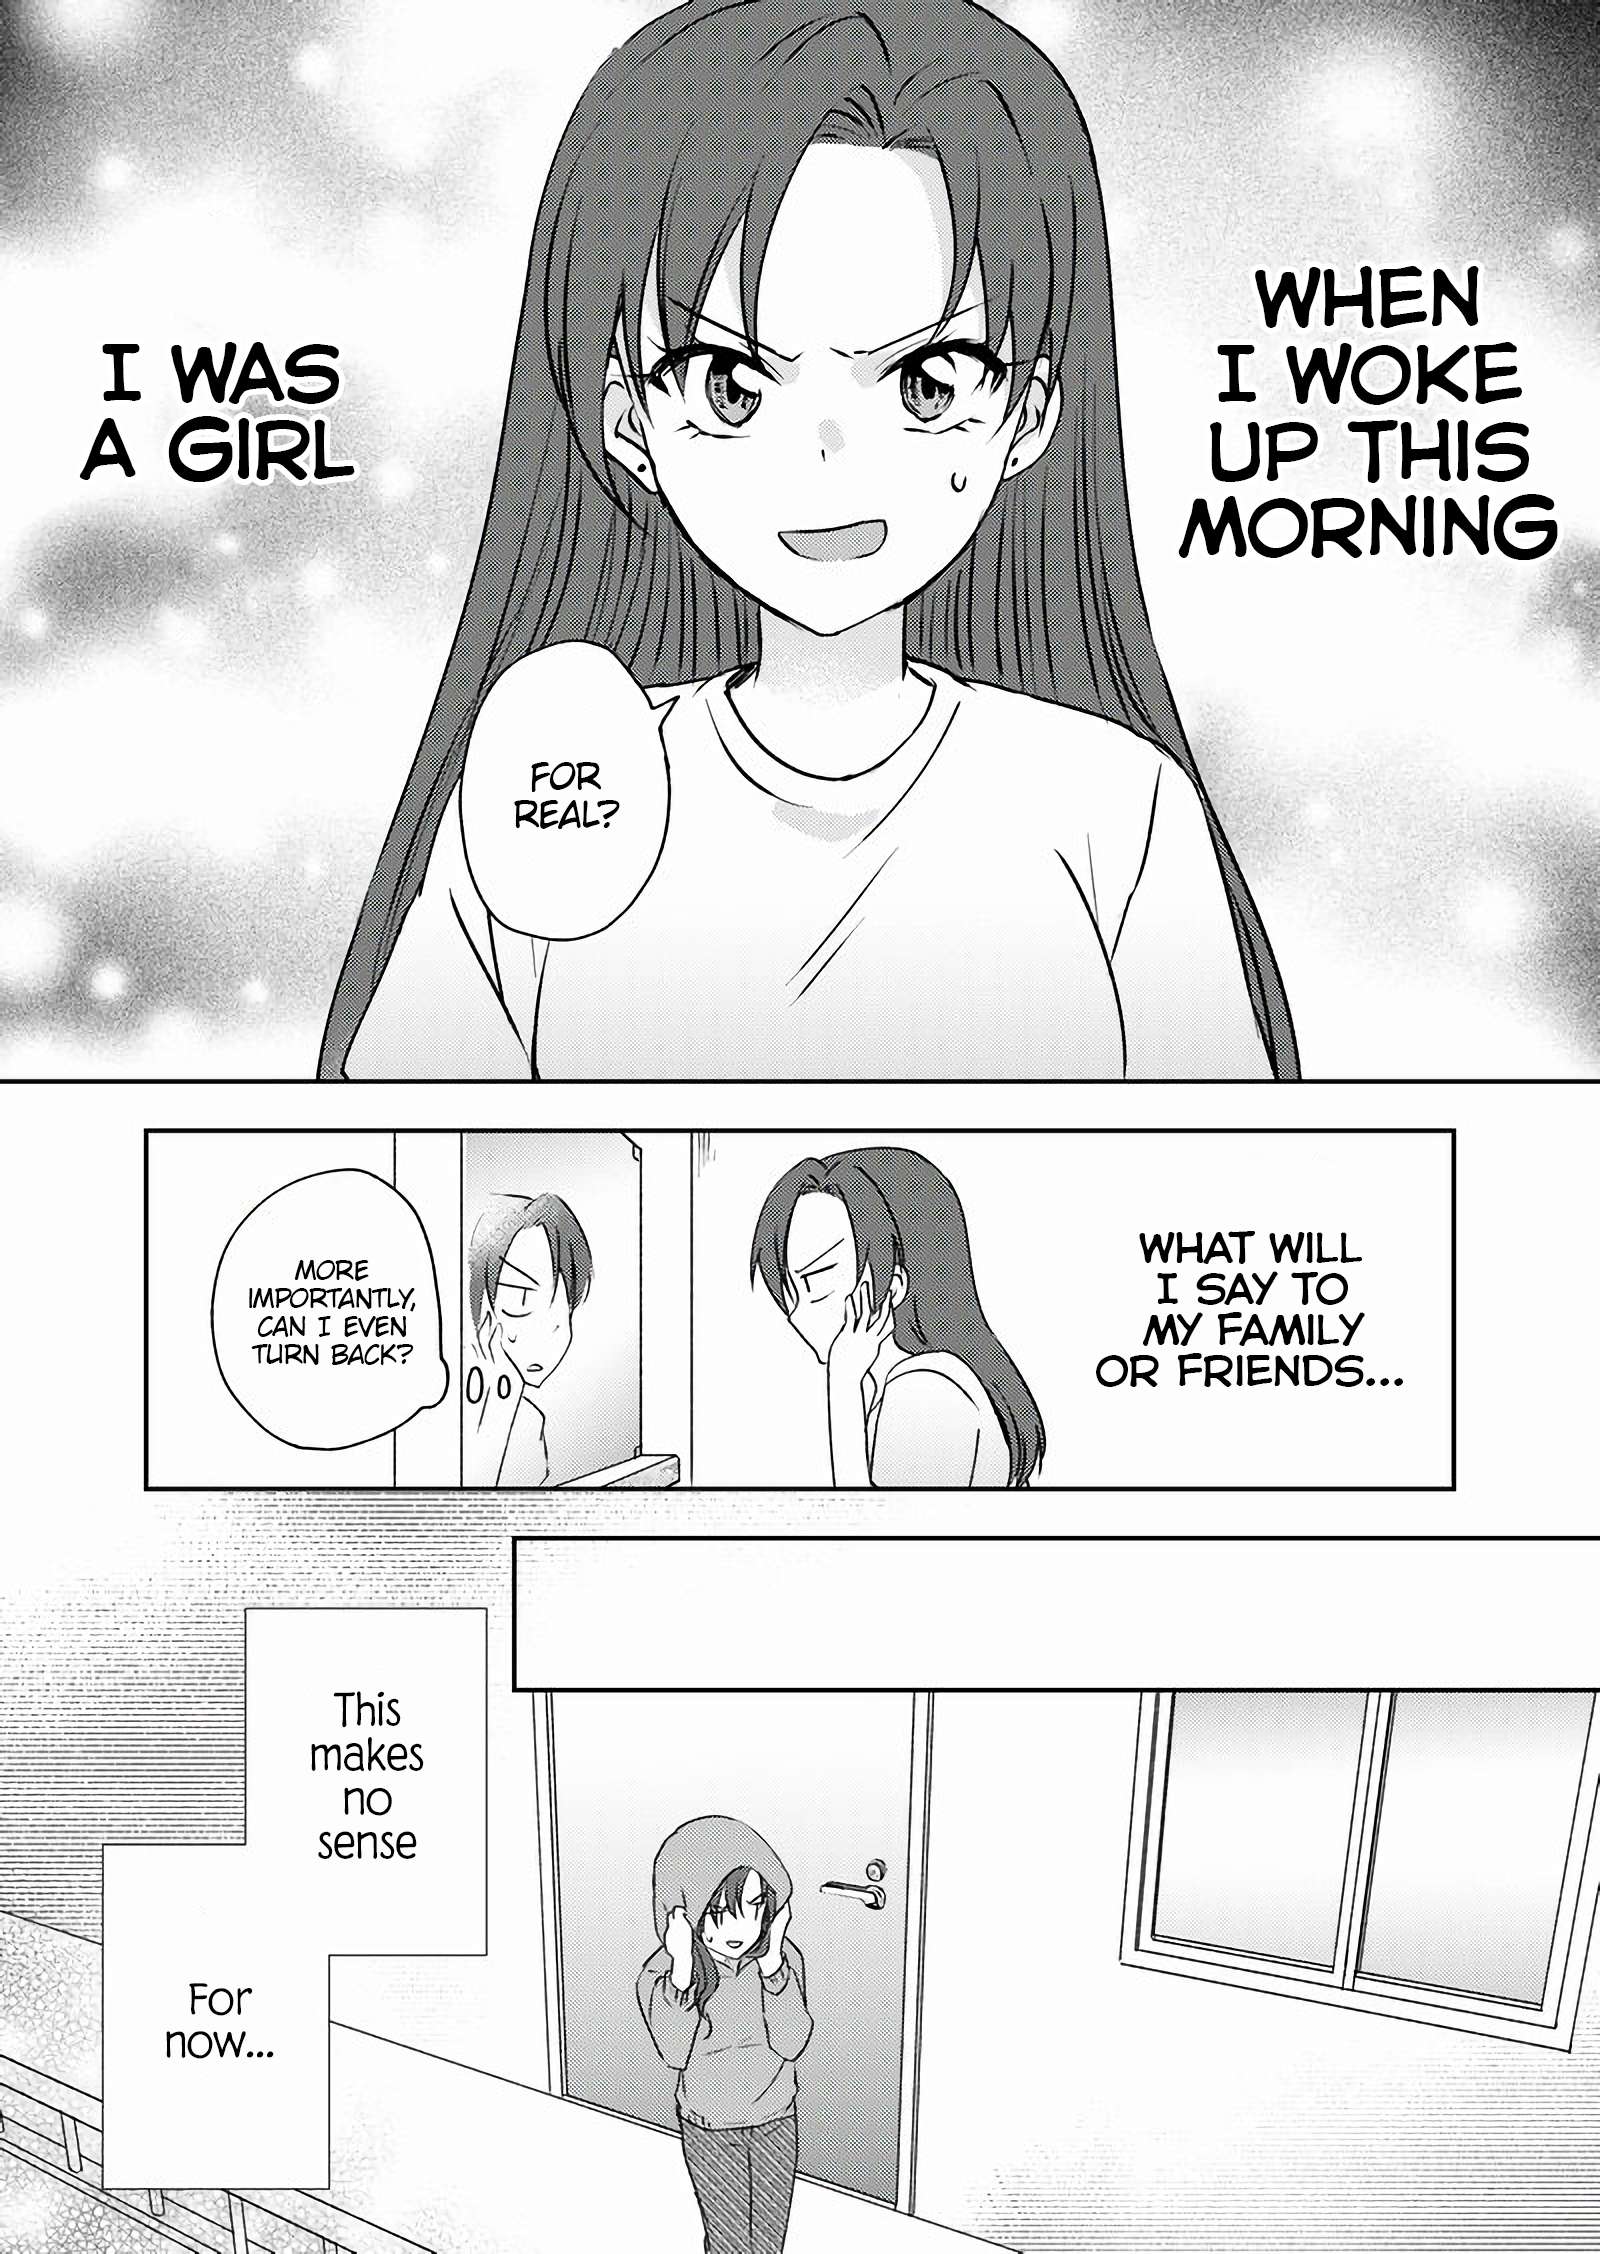 I Got Genderswapped (♂→♀), So I Tried To Seduce My Classmate - chapter 0 - #1